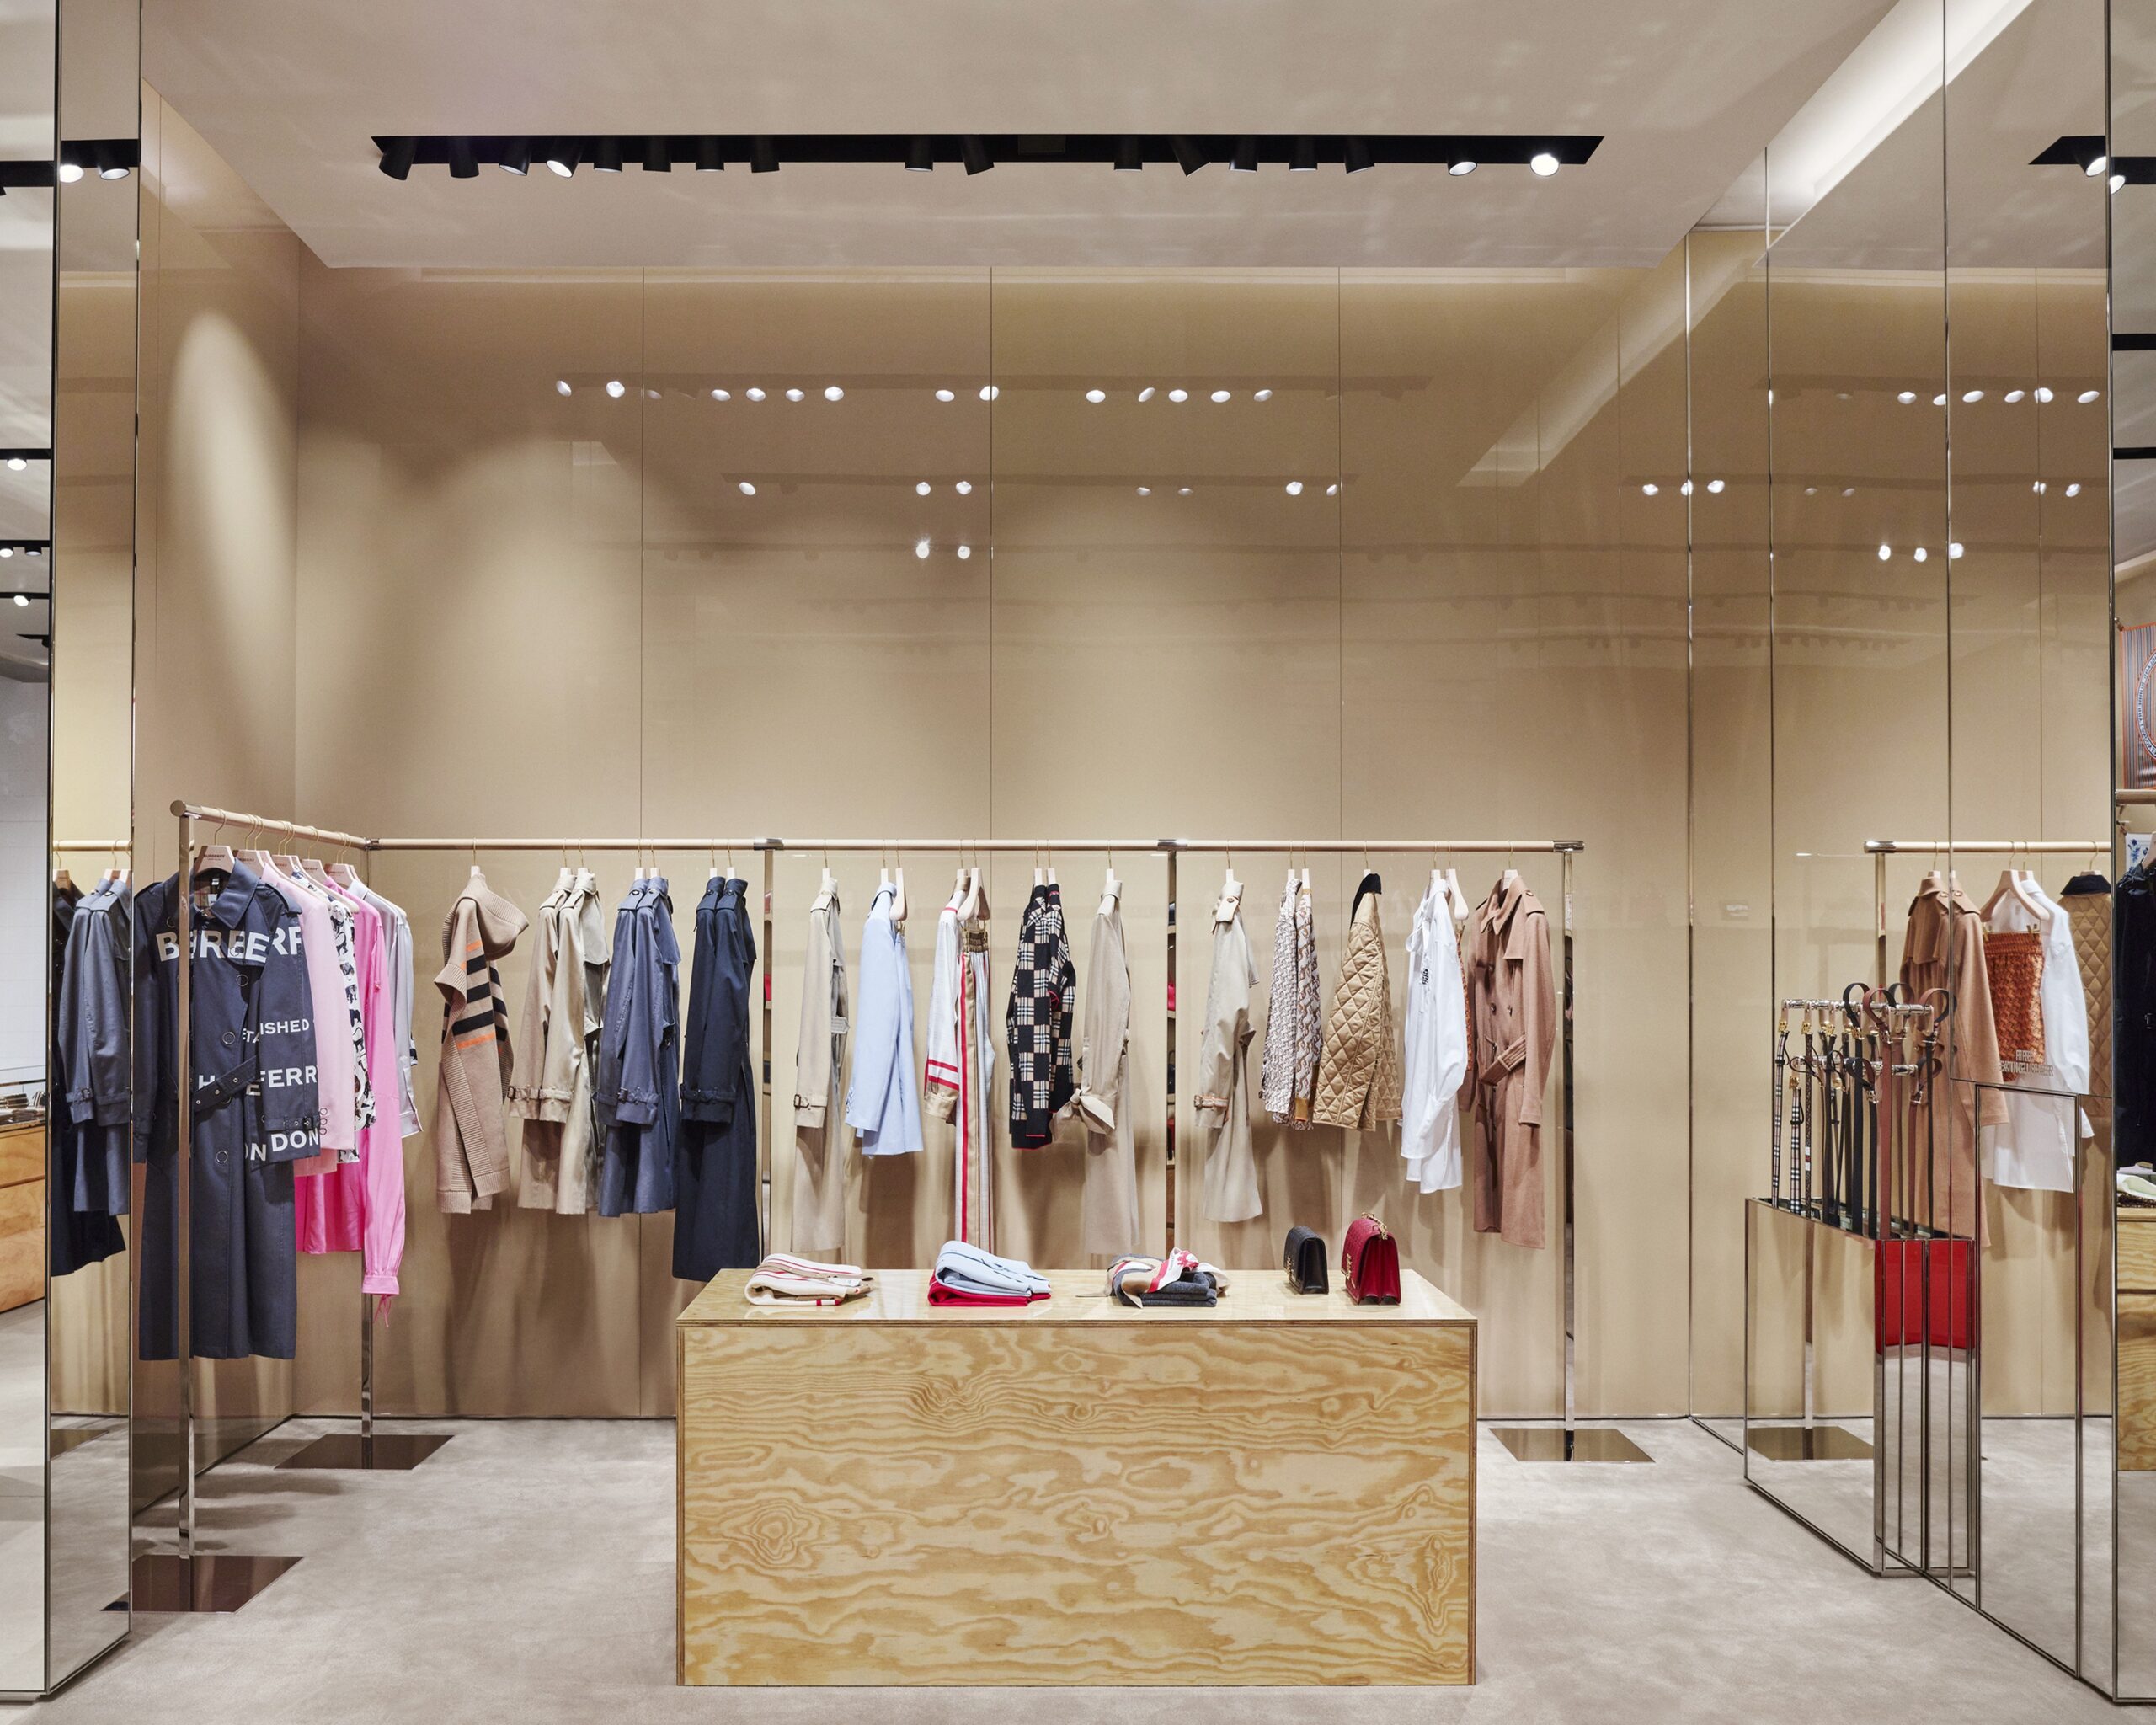 FIRST LOOK: Brisbane’s Brand New Burberry Store